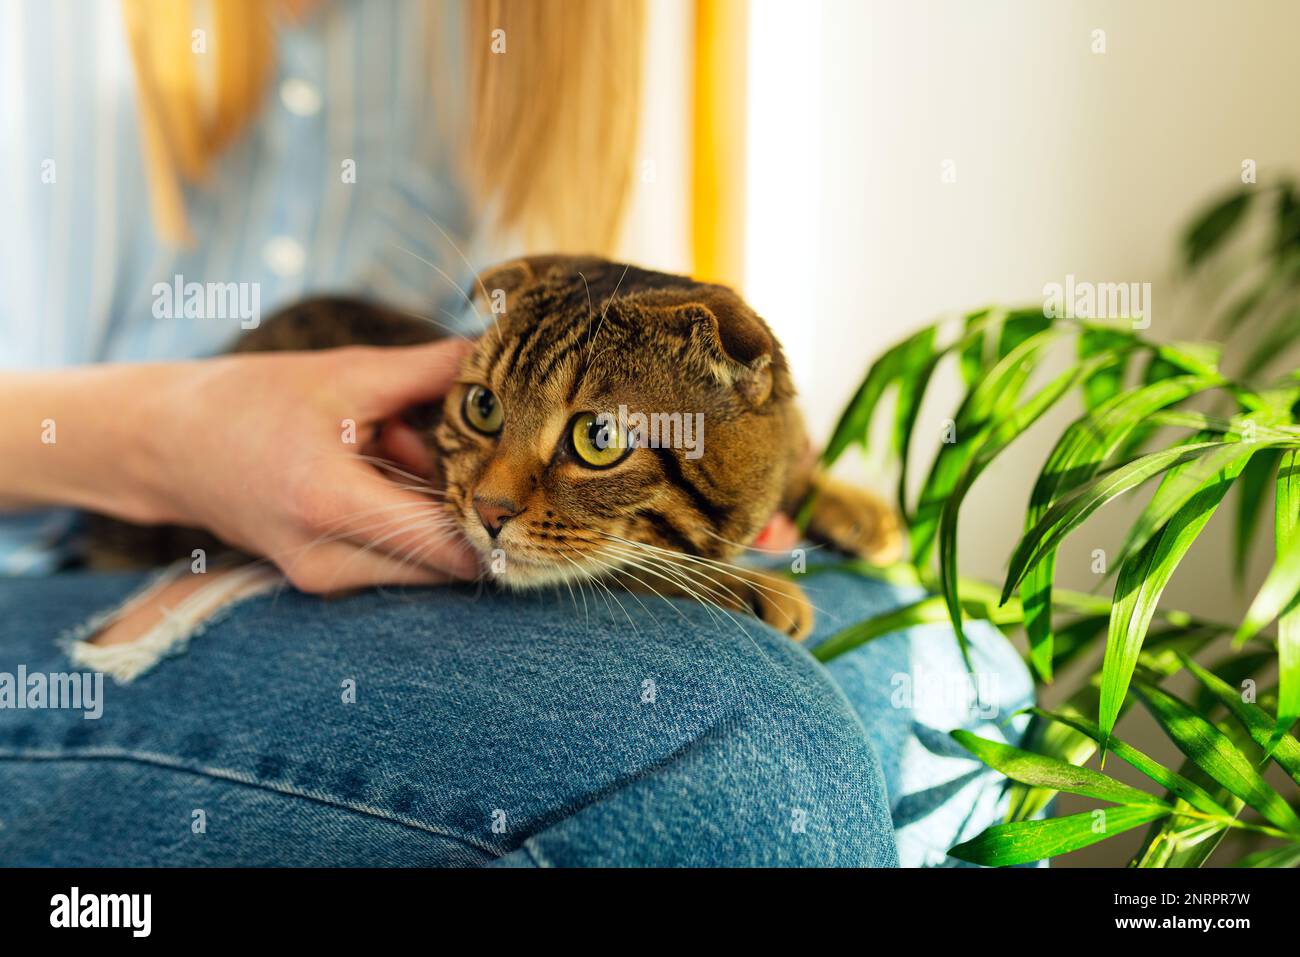 Close-up in Woman Holds a Cute Green-eyed Scottish Tabby Cat Who sits on her lap in her arms and hugs it, The concept of loving and caring for pets Stock Photo